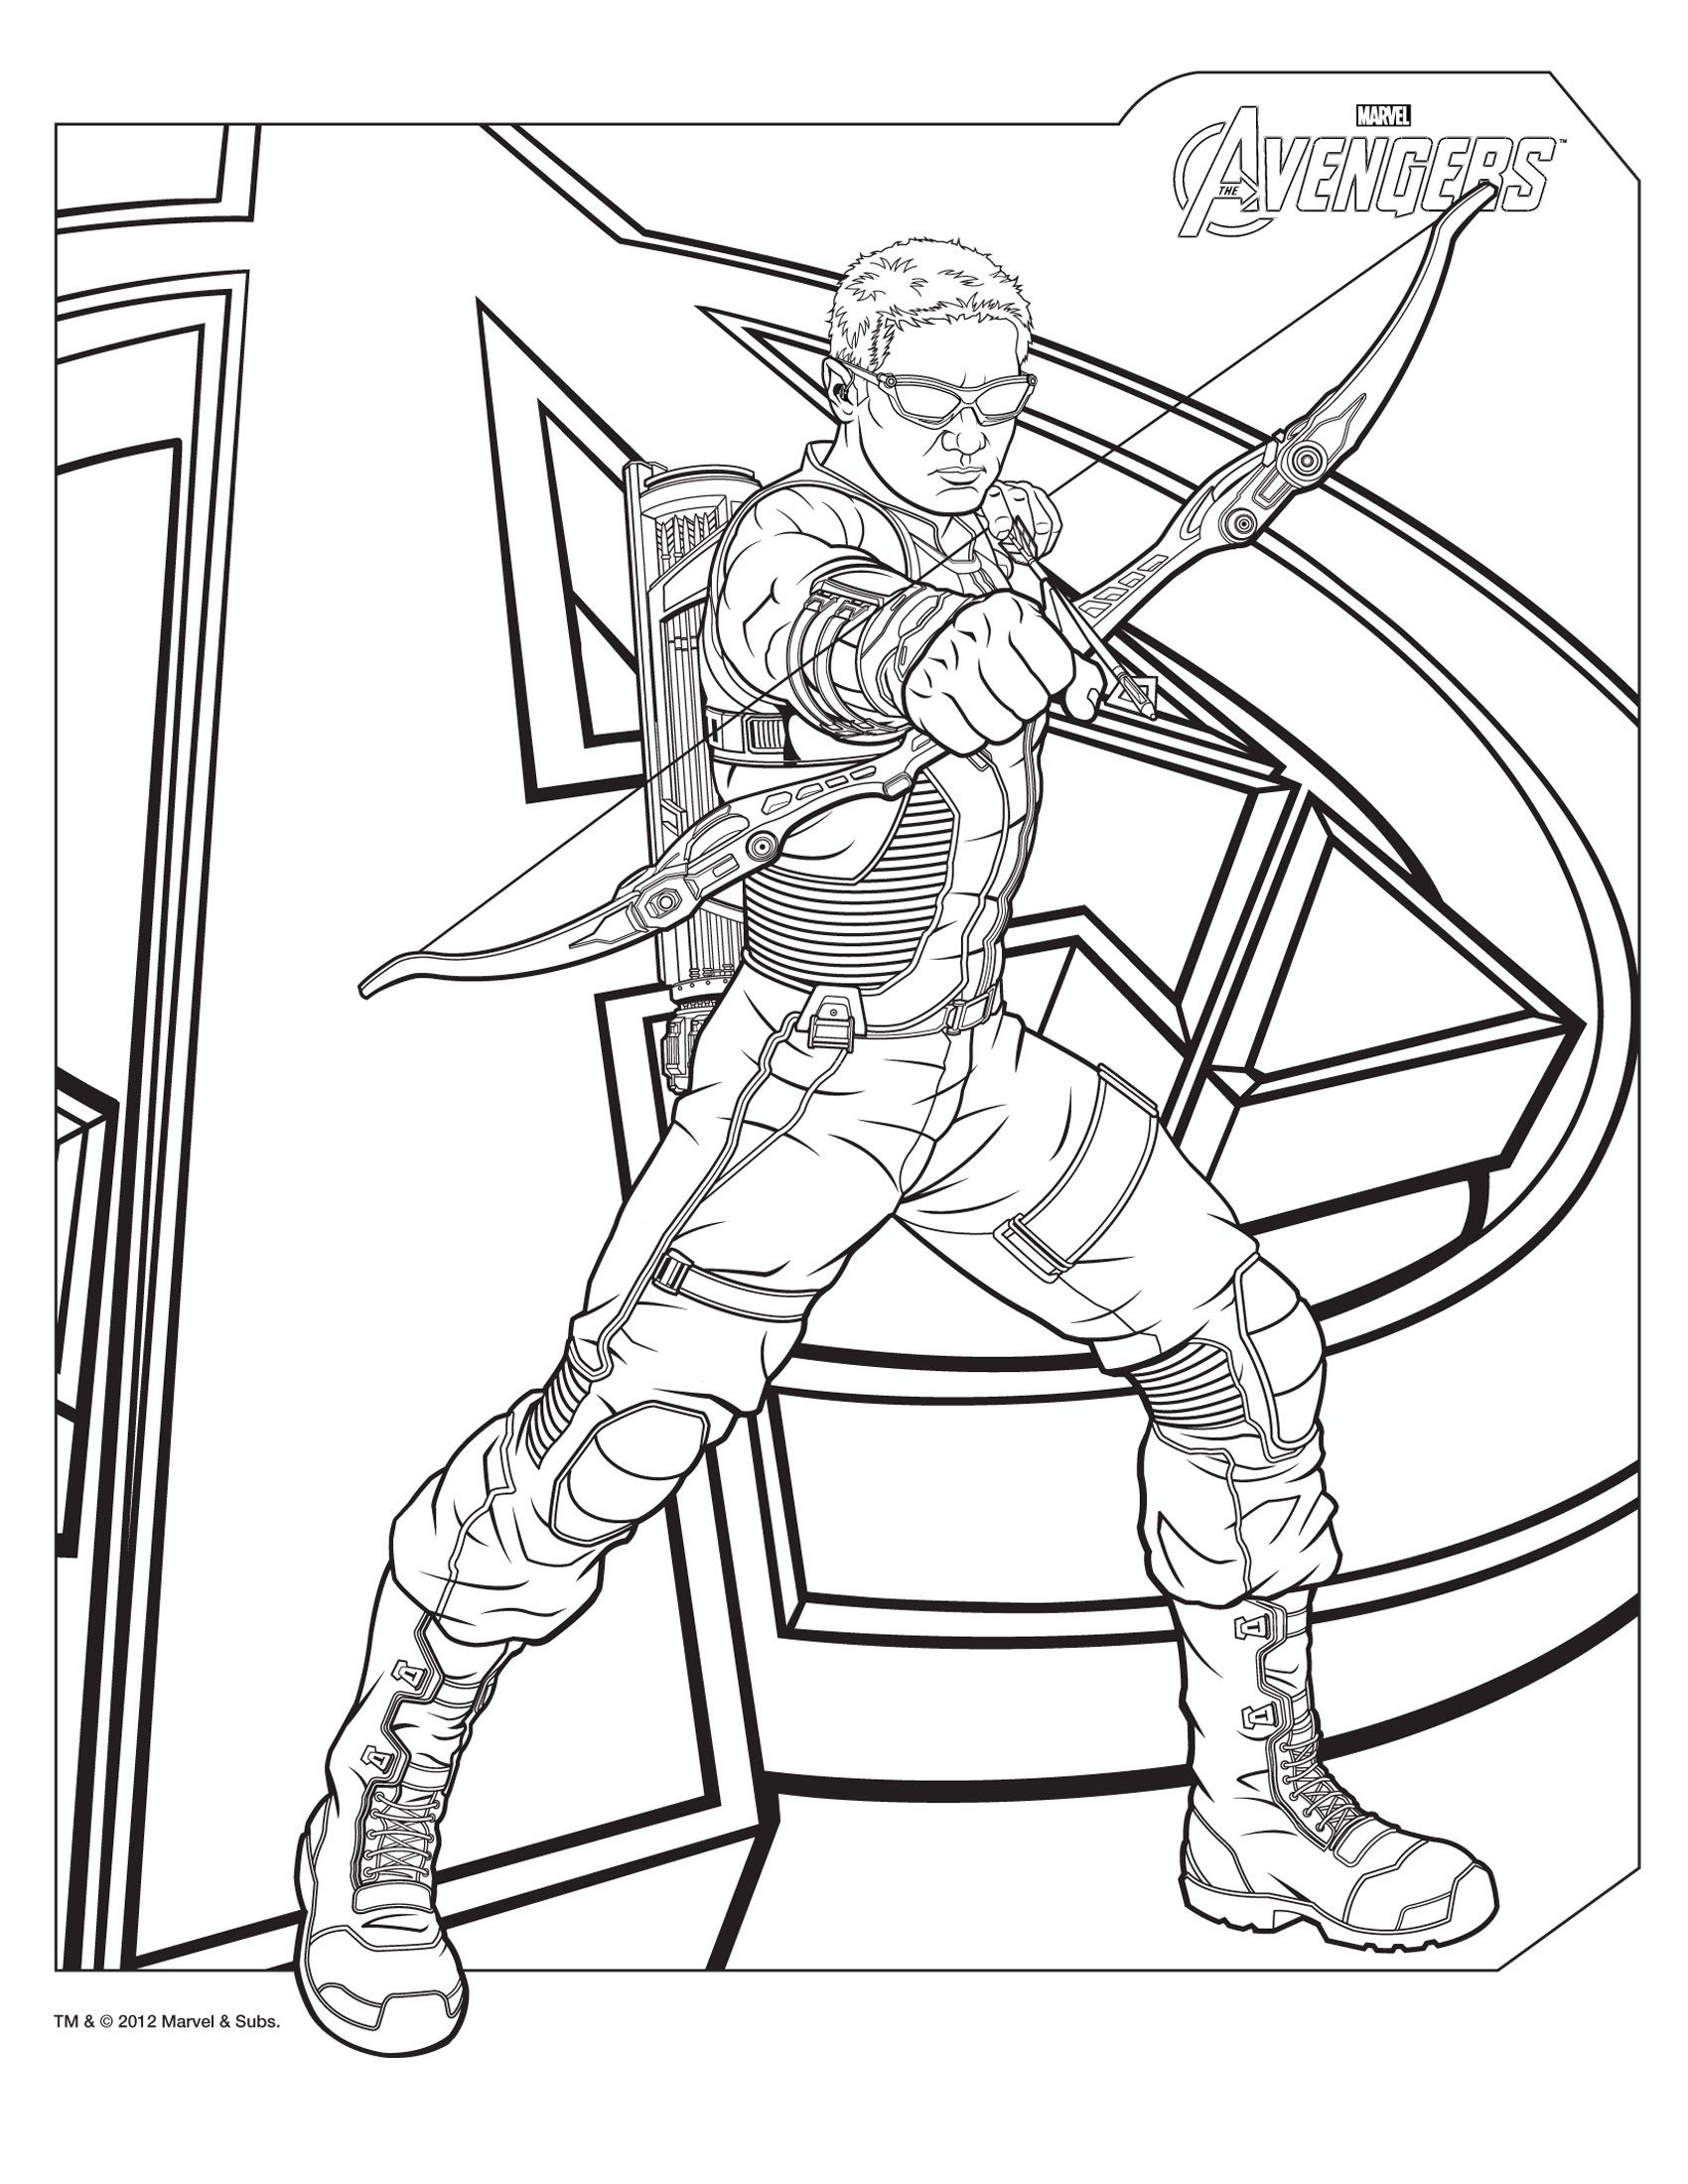 Hawkeye | Avengers coloring pages, Avengers coloring, Marvel coloring